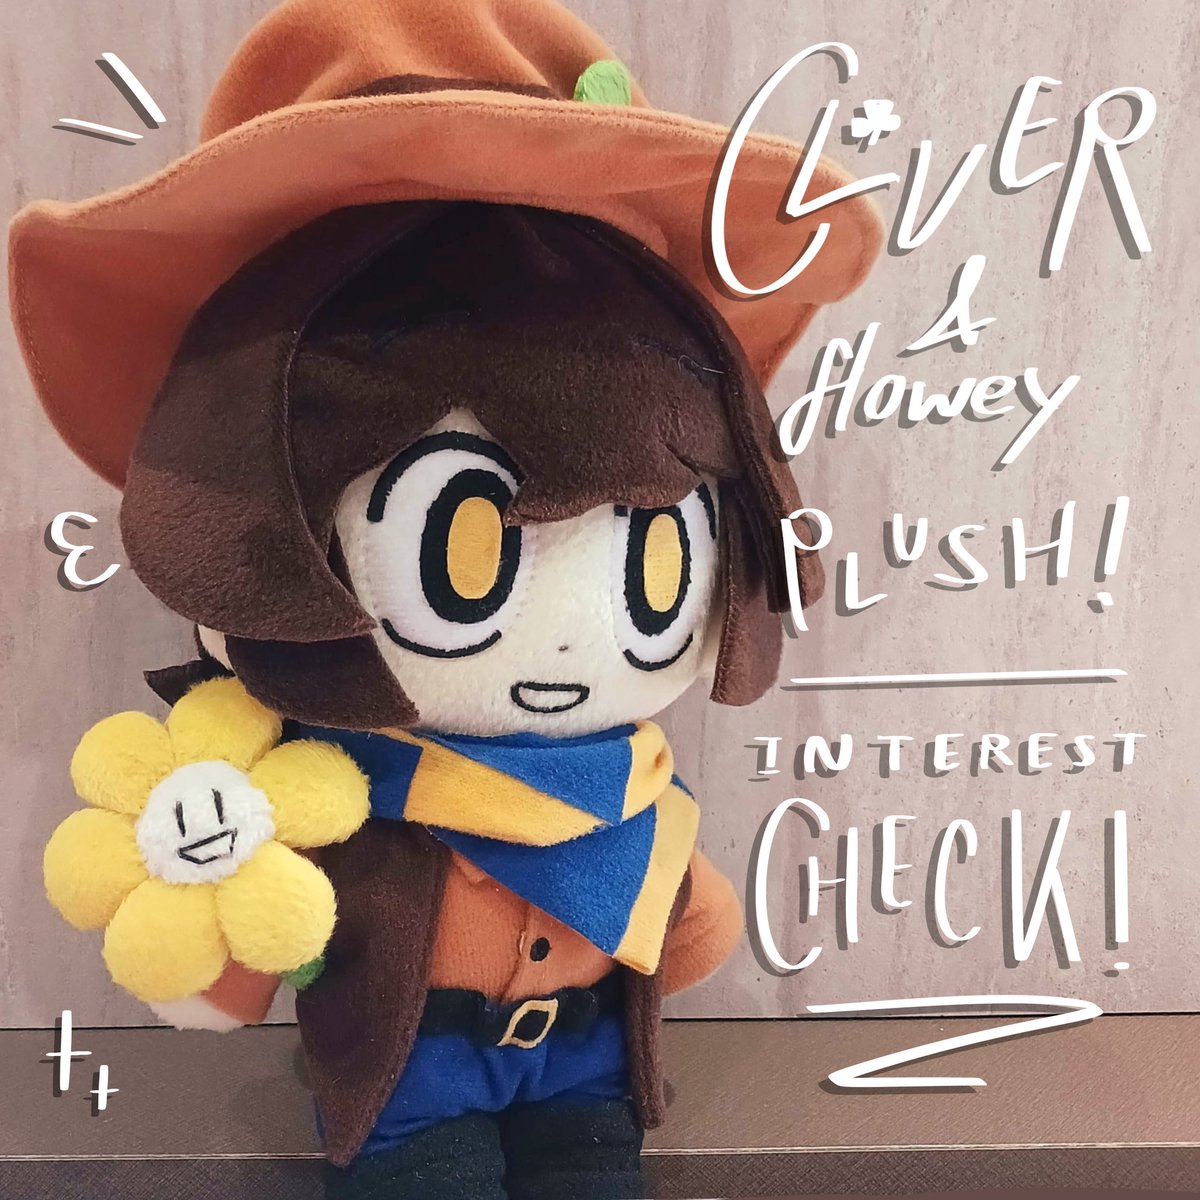 [ UTY PLUSH INTEREST CHECK ‼️ ] OUAH after a bunch of back & forth-ing its finally here!! Link is in the replies below ⤵️ >:DD👌👌 the goal is to have at least 50 purchase-interested-responses but any response is gladly appreciated >:)) #UndertaleYellow #undertaleyellowclover